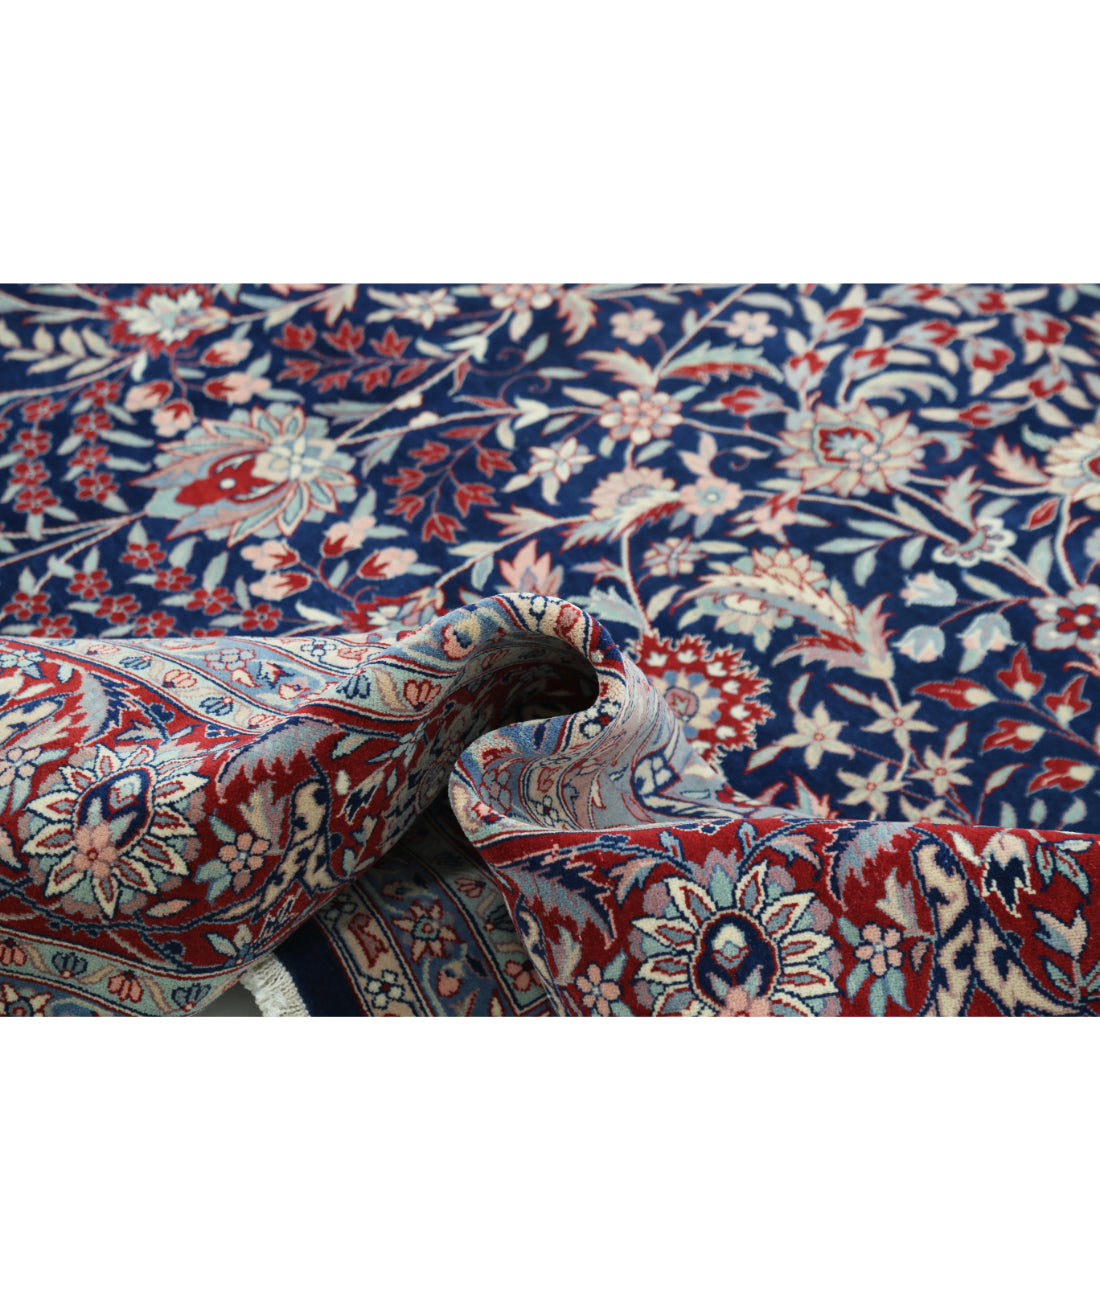 Heritage 9' 9" X 13' 10" Hand-Knotted Wool Rug 9' 9" X 13' 10" (297 X 422) / Blue / Red